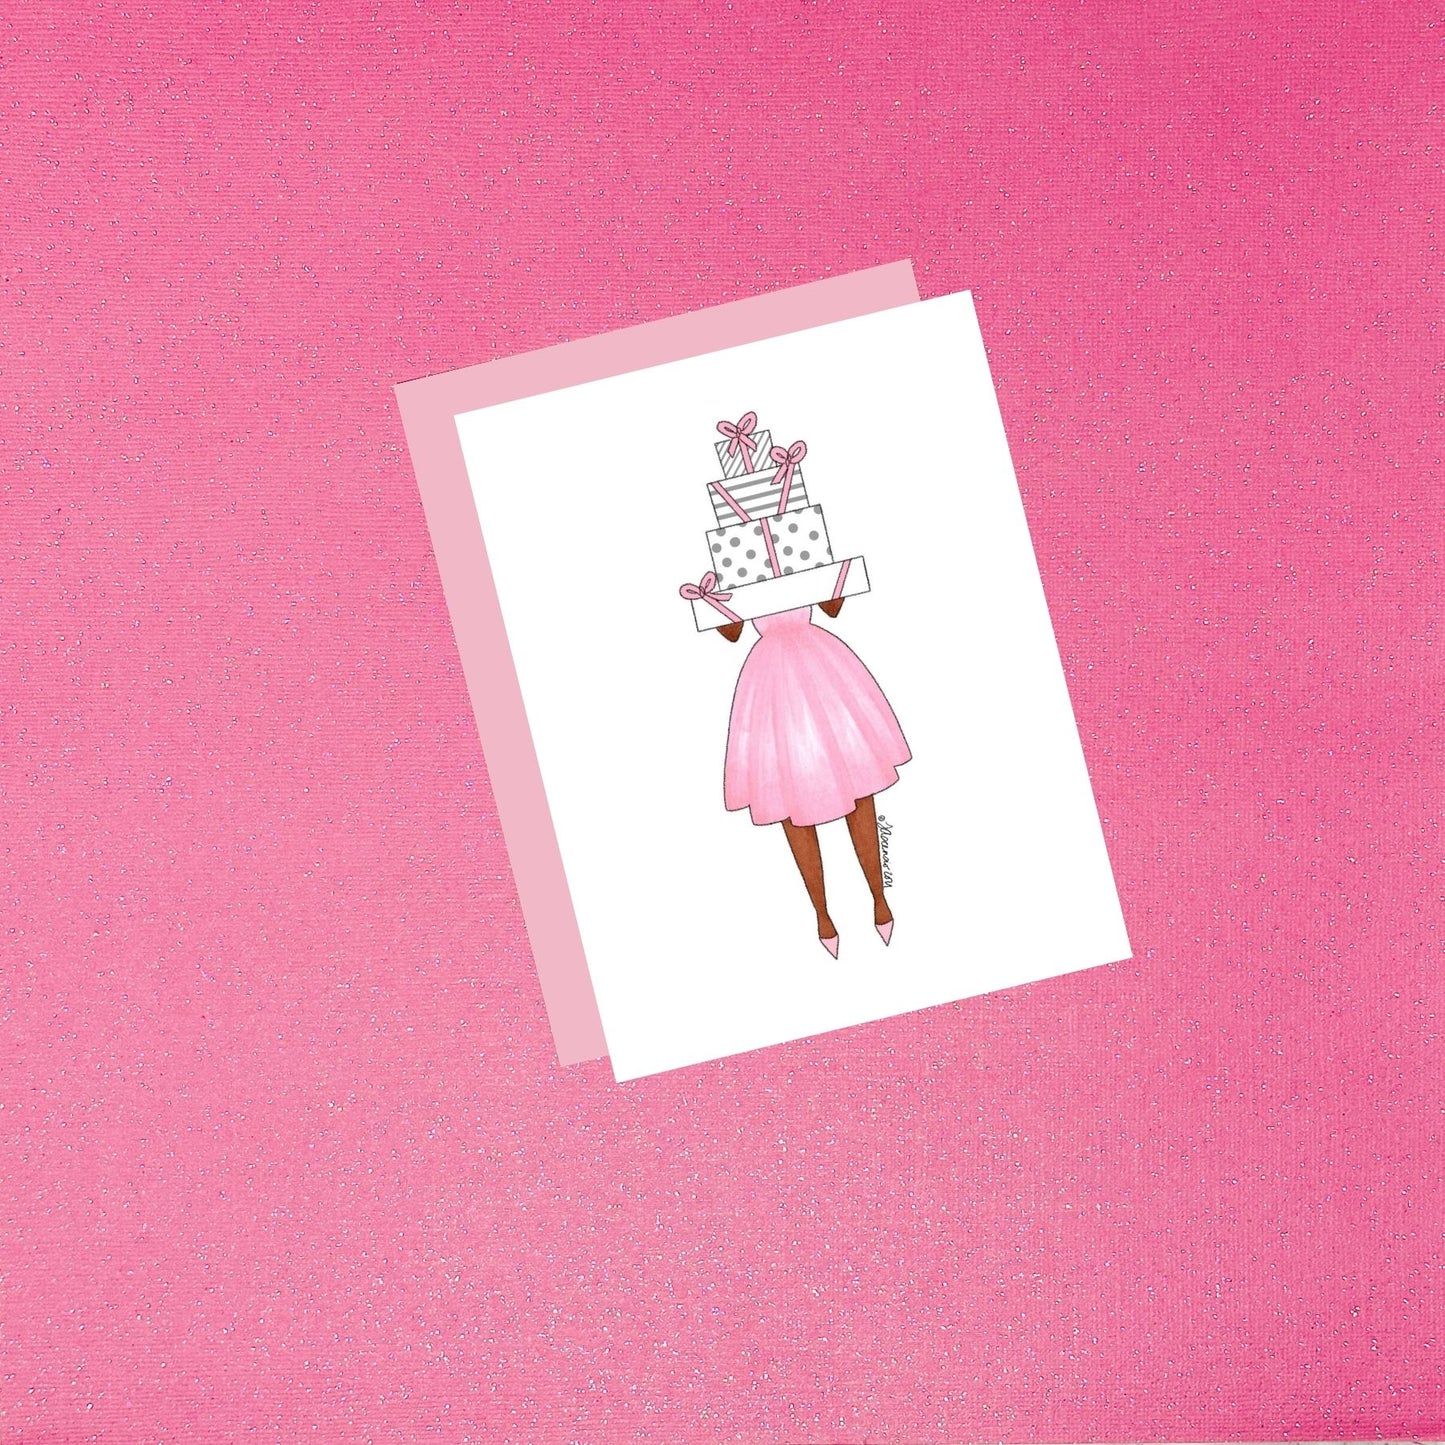 Girl With Presents - Gracious Gifts Fashion Illustration Card - Light Pink Dark Skin